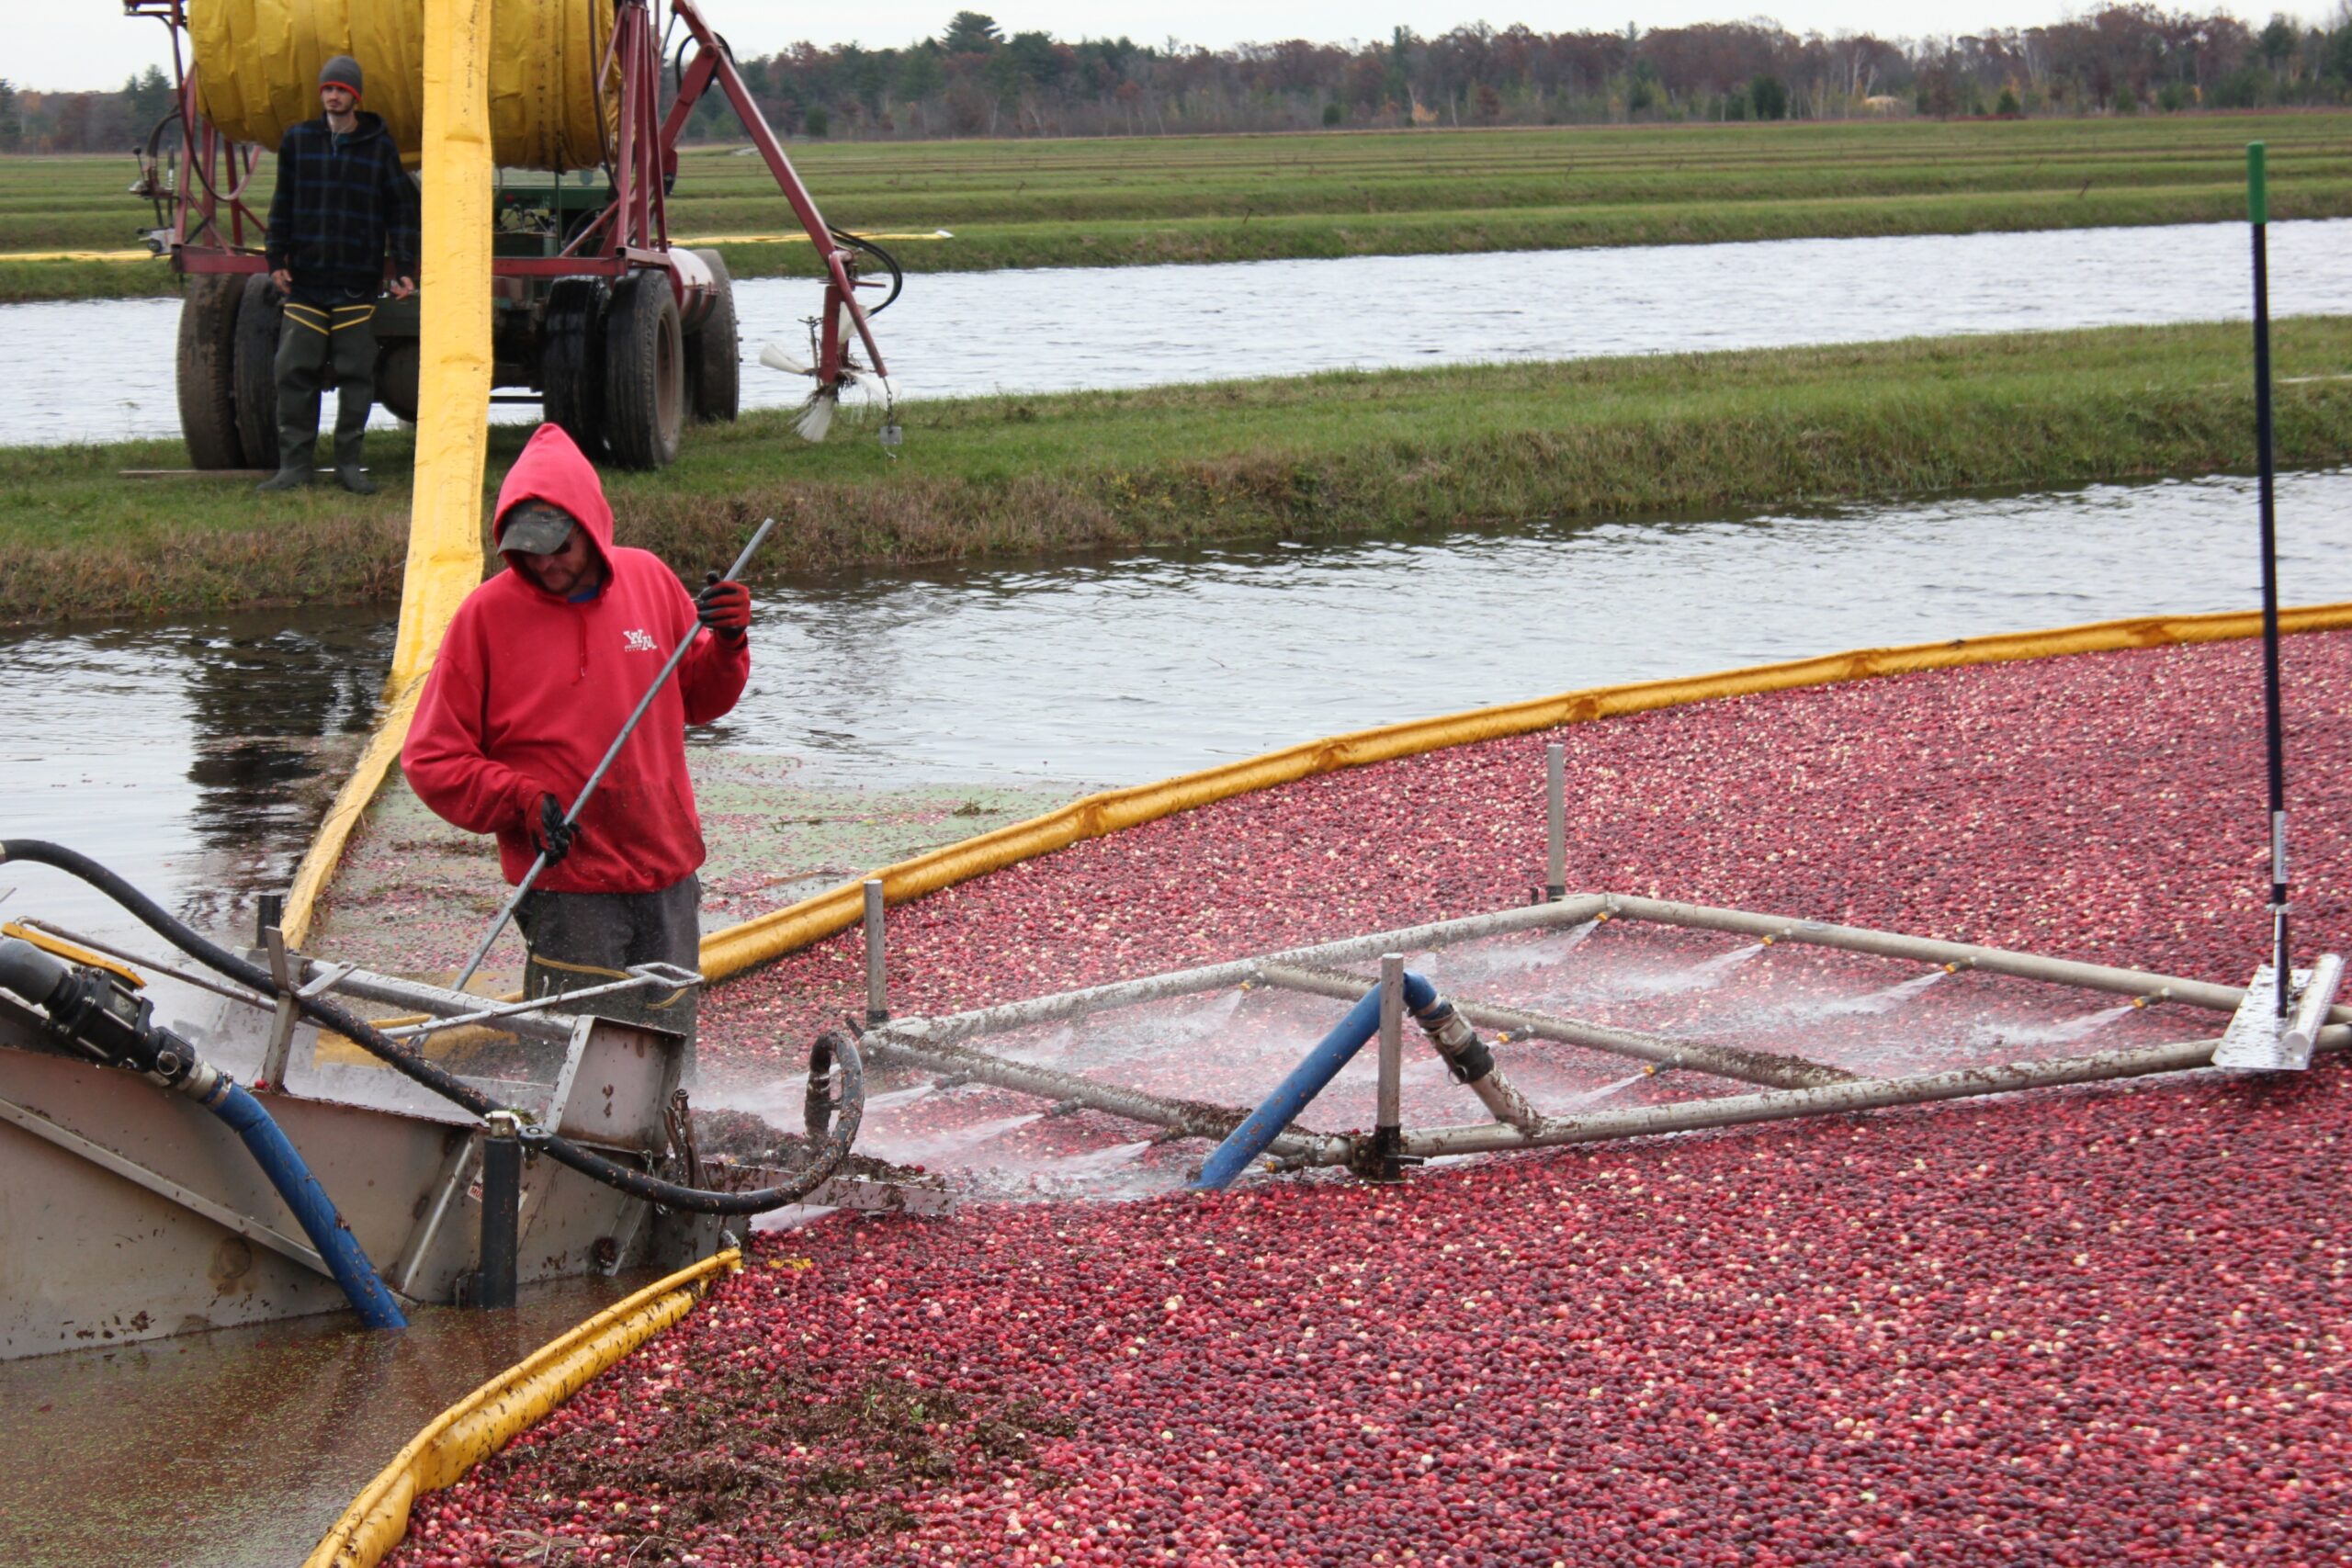 A worker at the Cutler Cranberry Co. farm in Camp Douglas